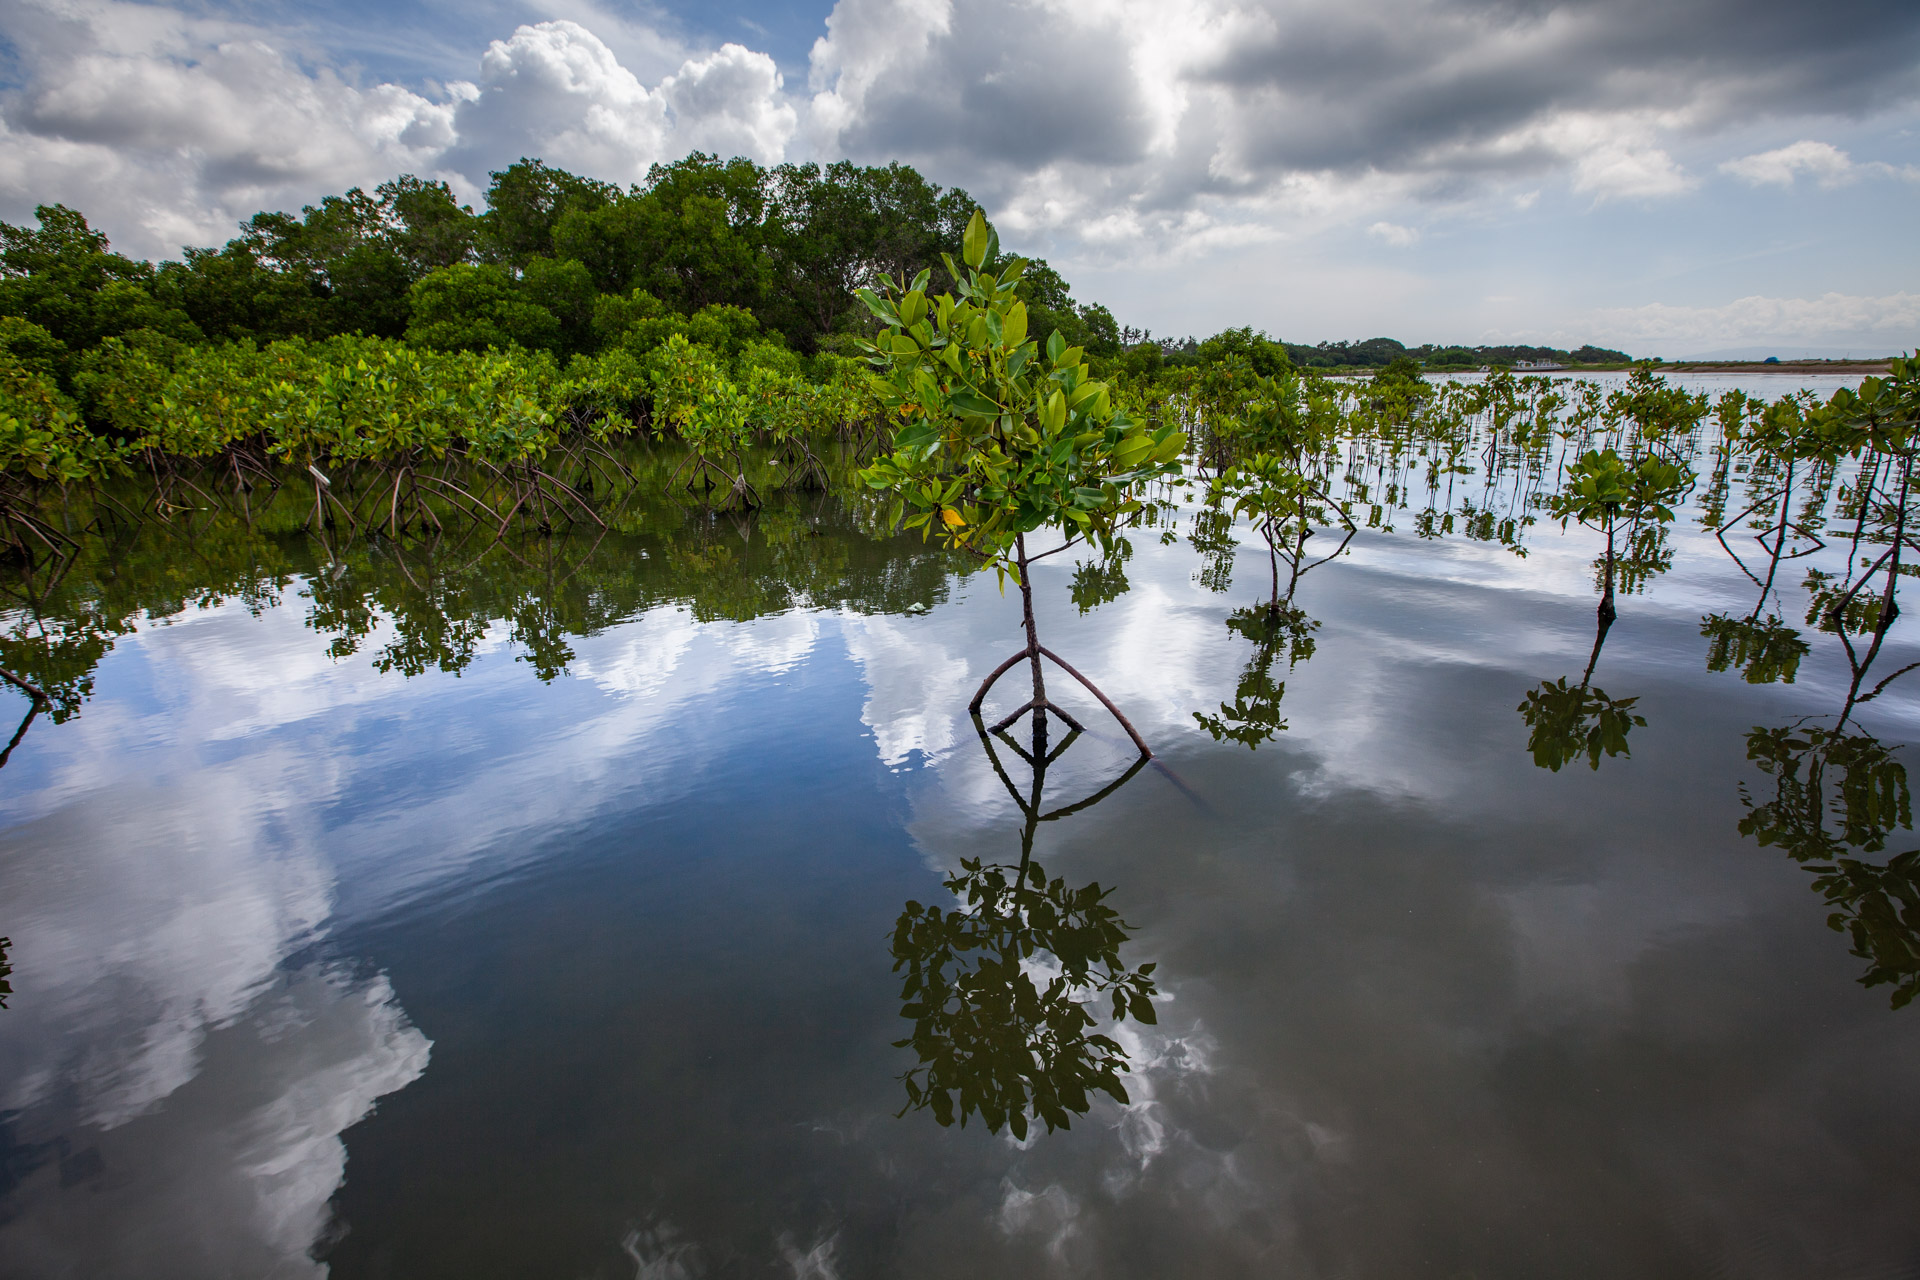 REV Ocean supports mangrove restoration for CO2 removal and community development